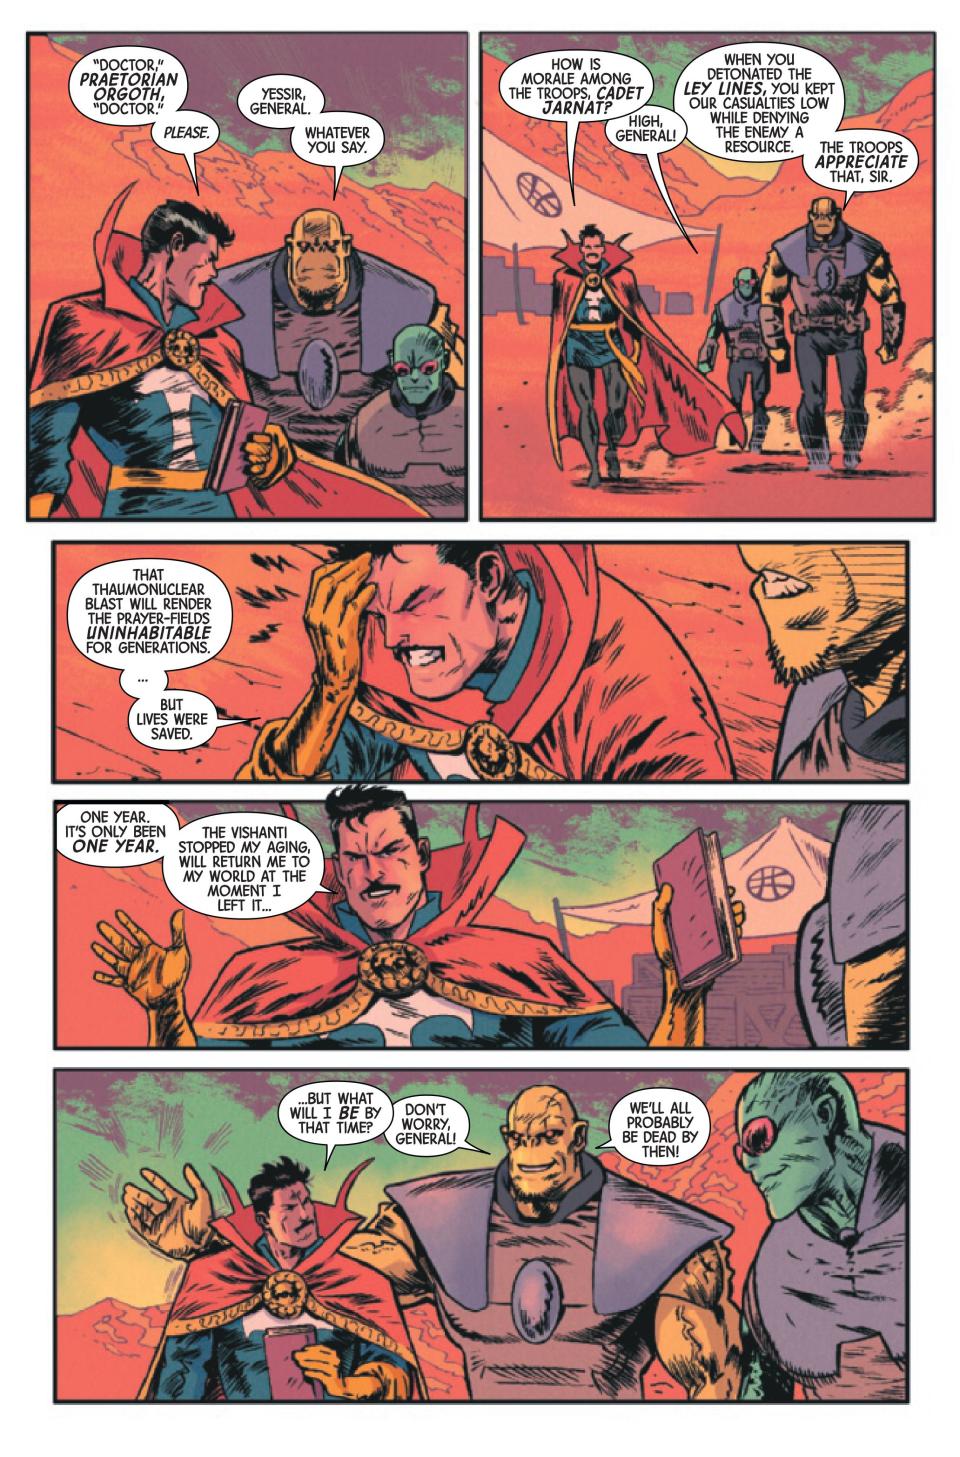 Pages from Dr. Strange #6